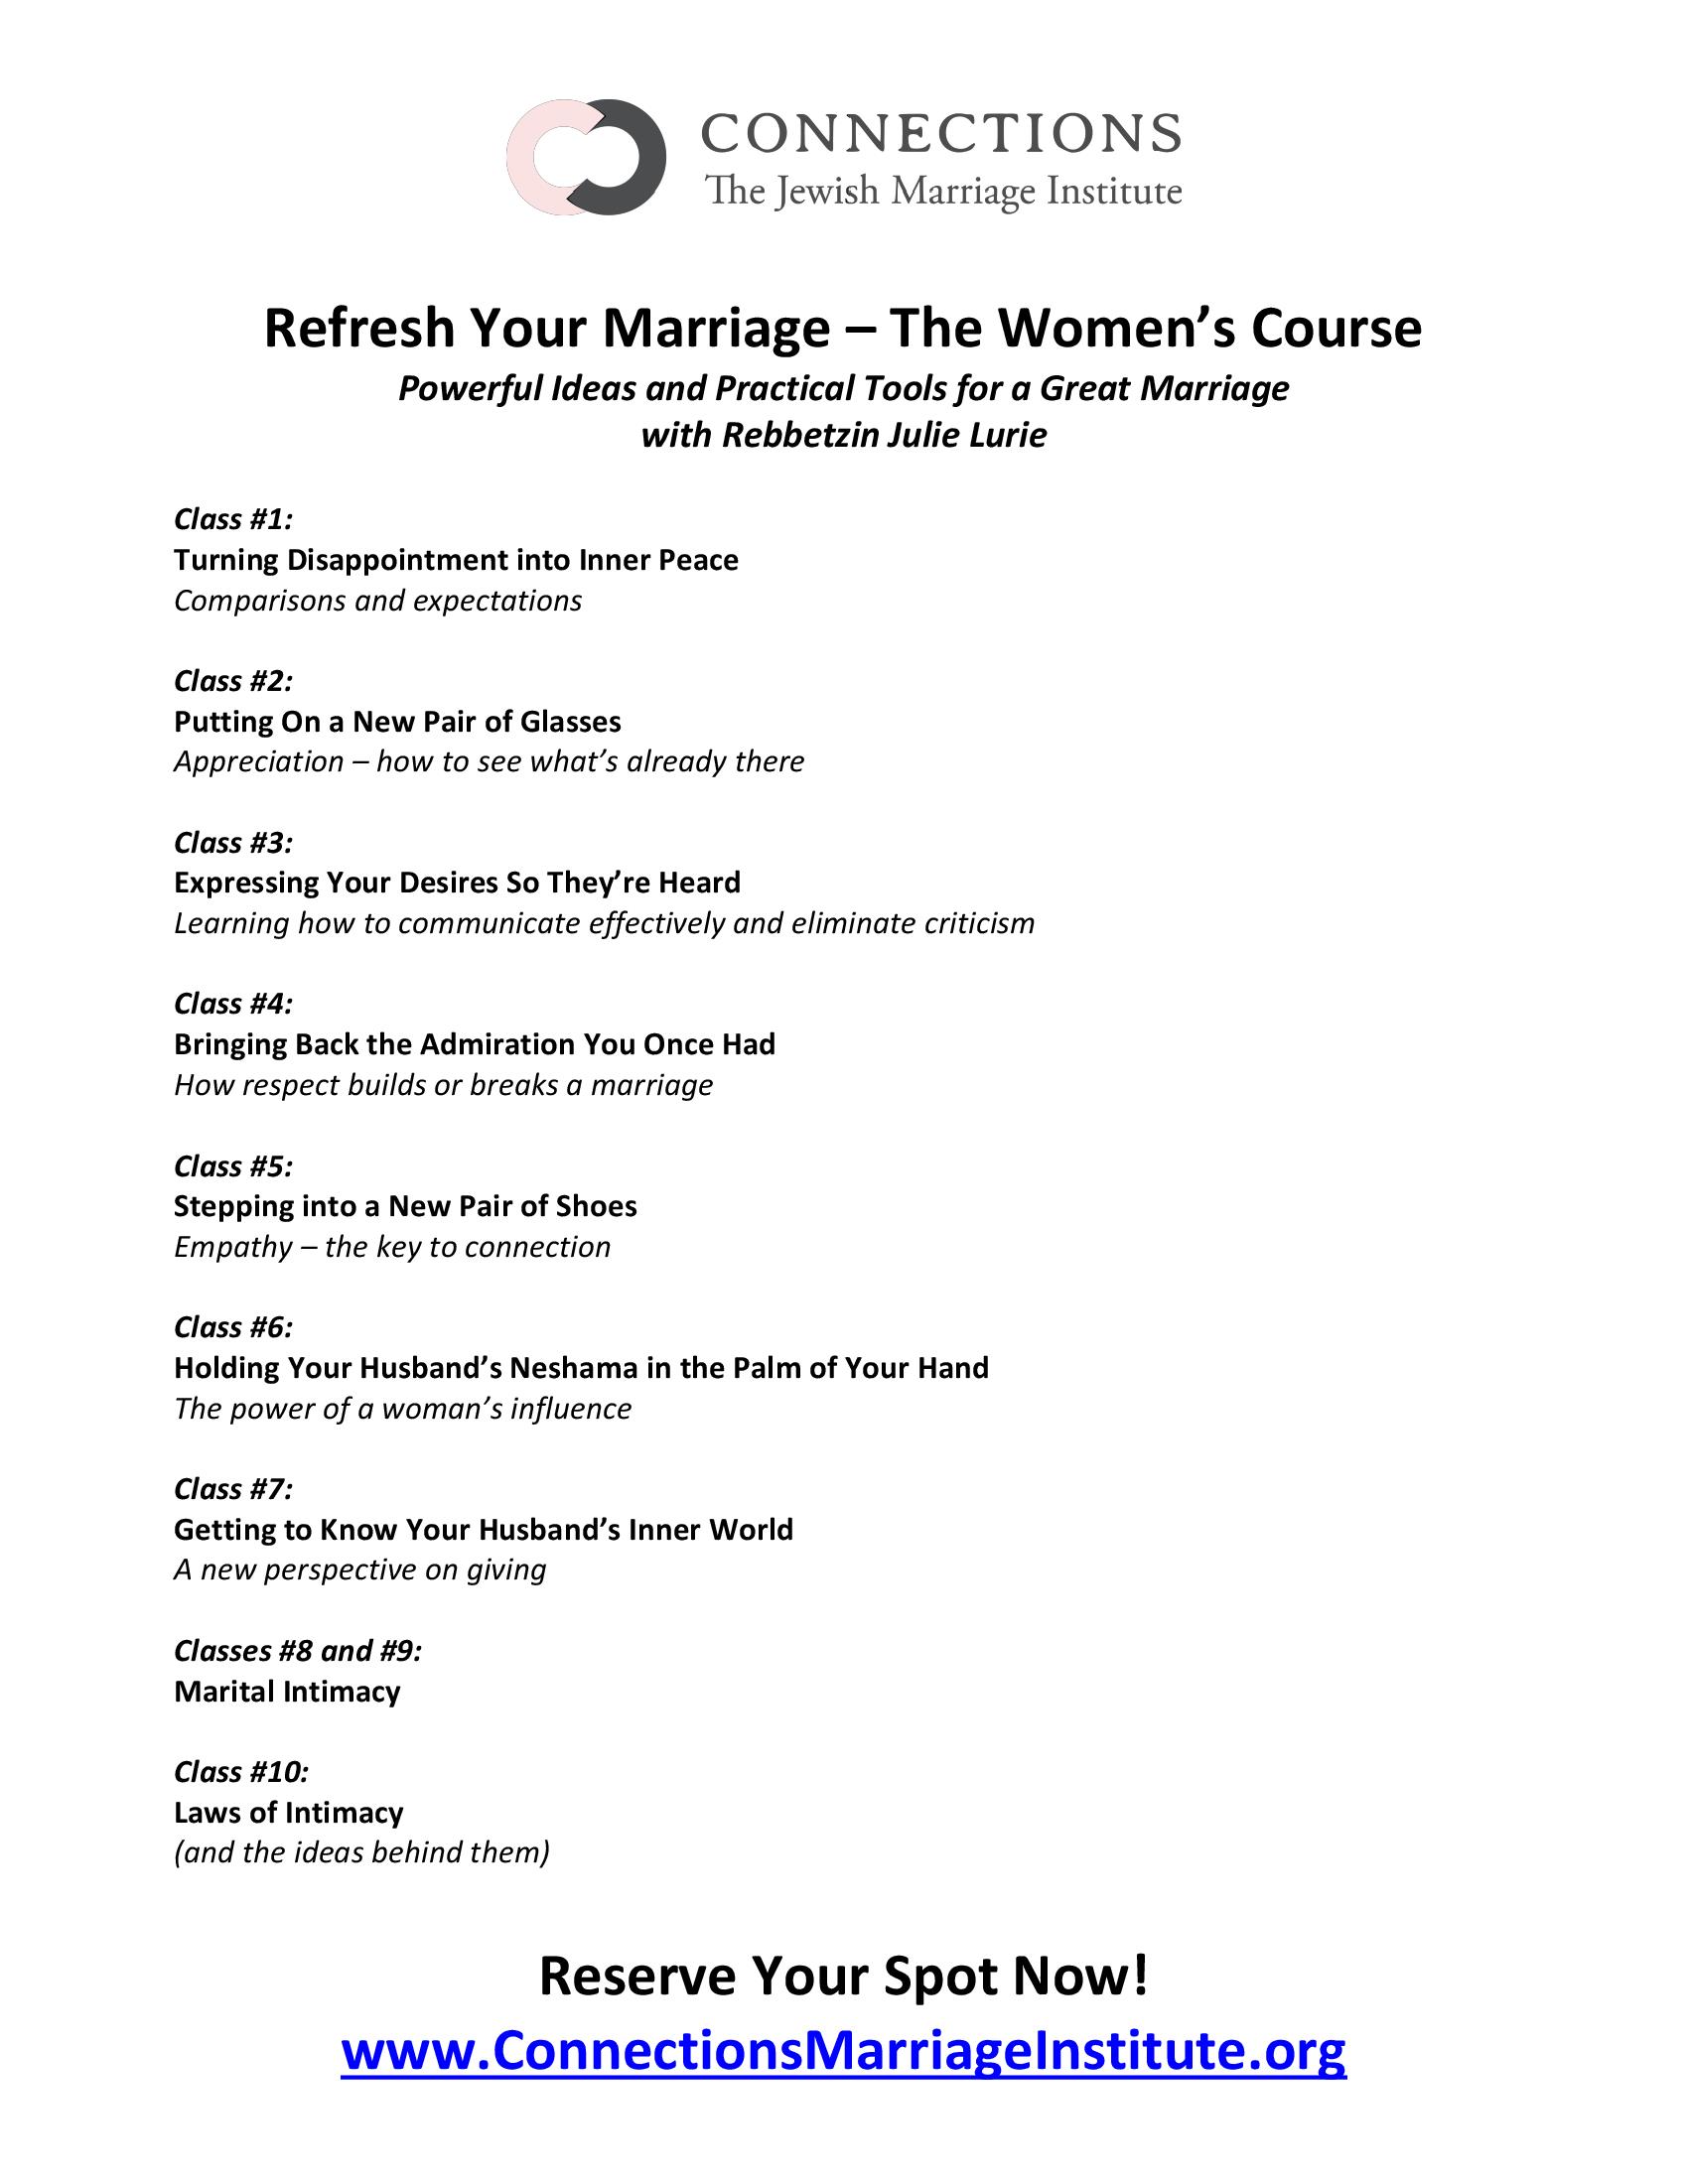 Click here for women's course outline!